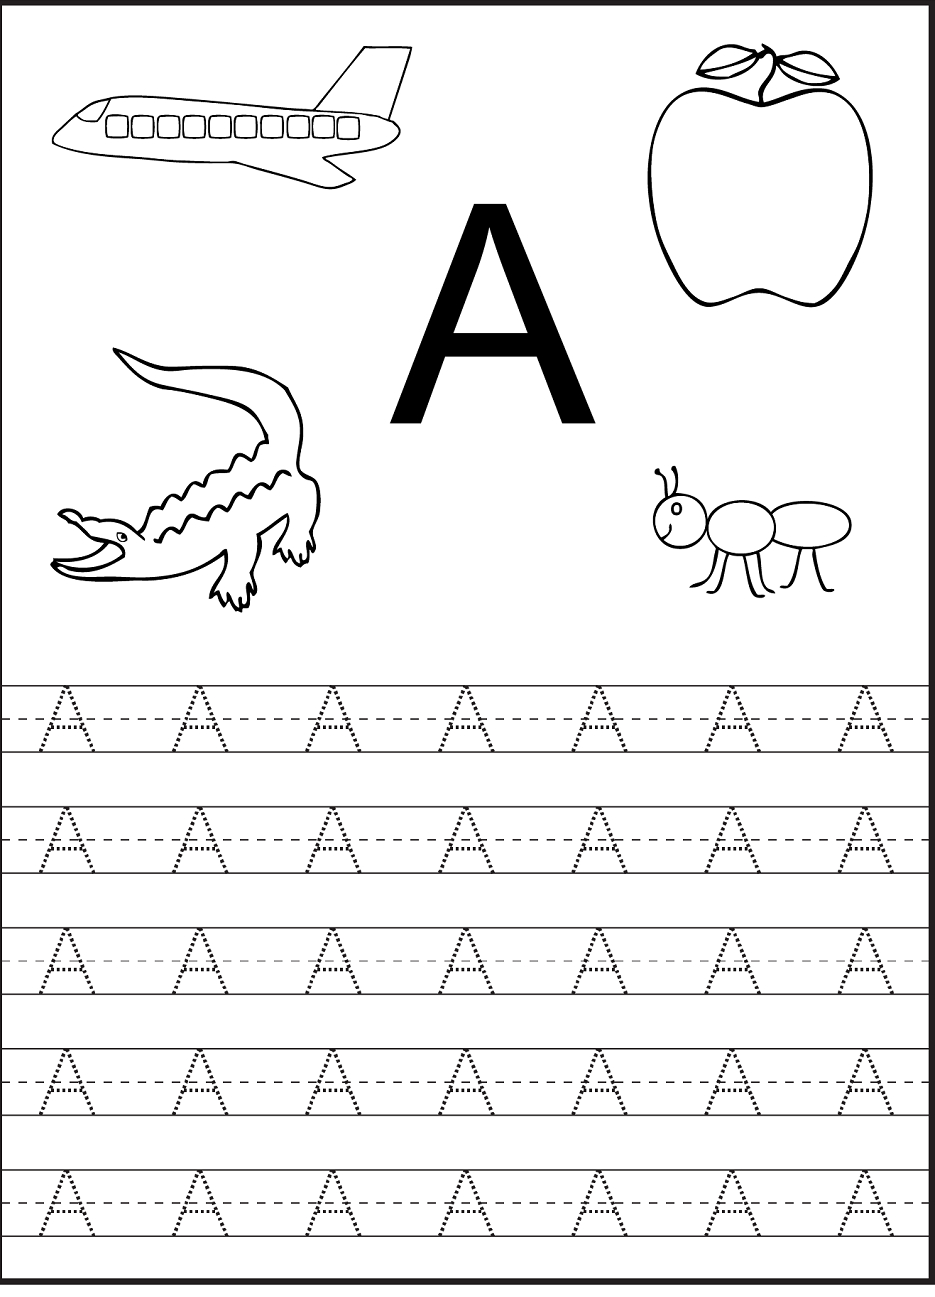 Tracing The Letter A Free Printable | Alphabet And Numbers Learning | Free Printable Letter A Worksheets For Pre K